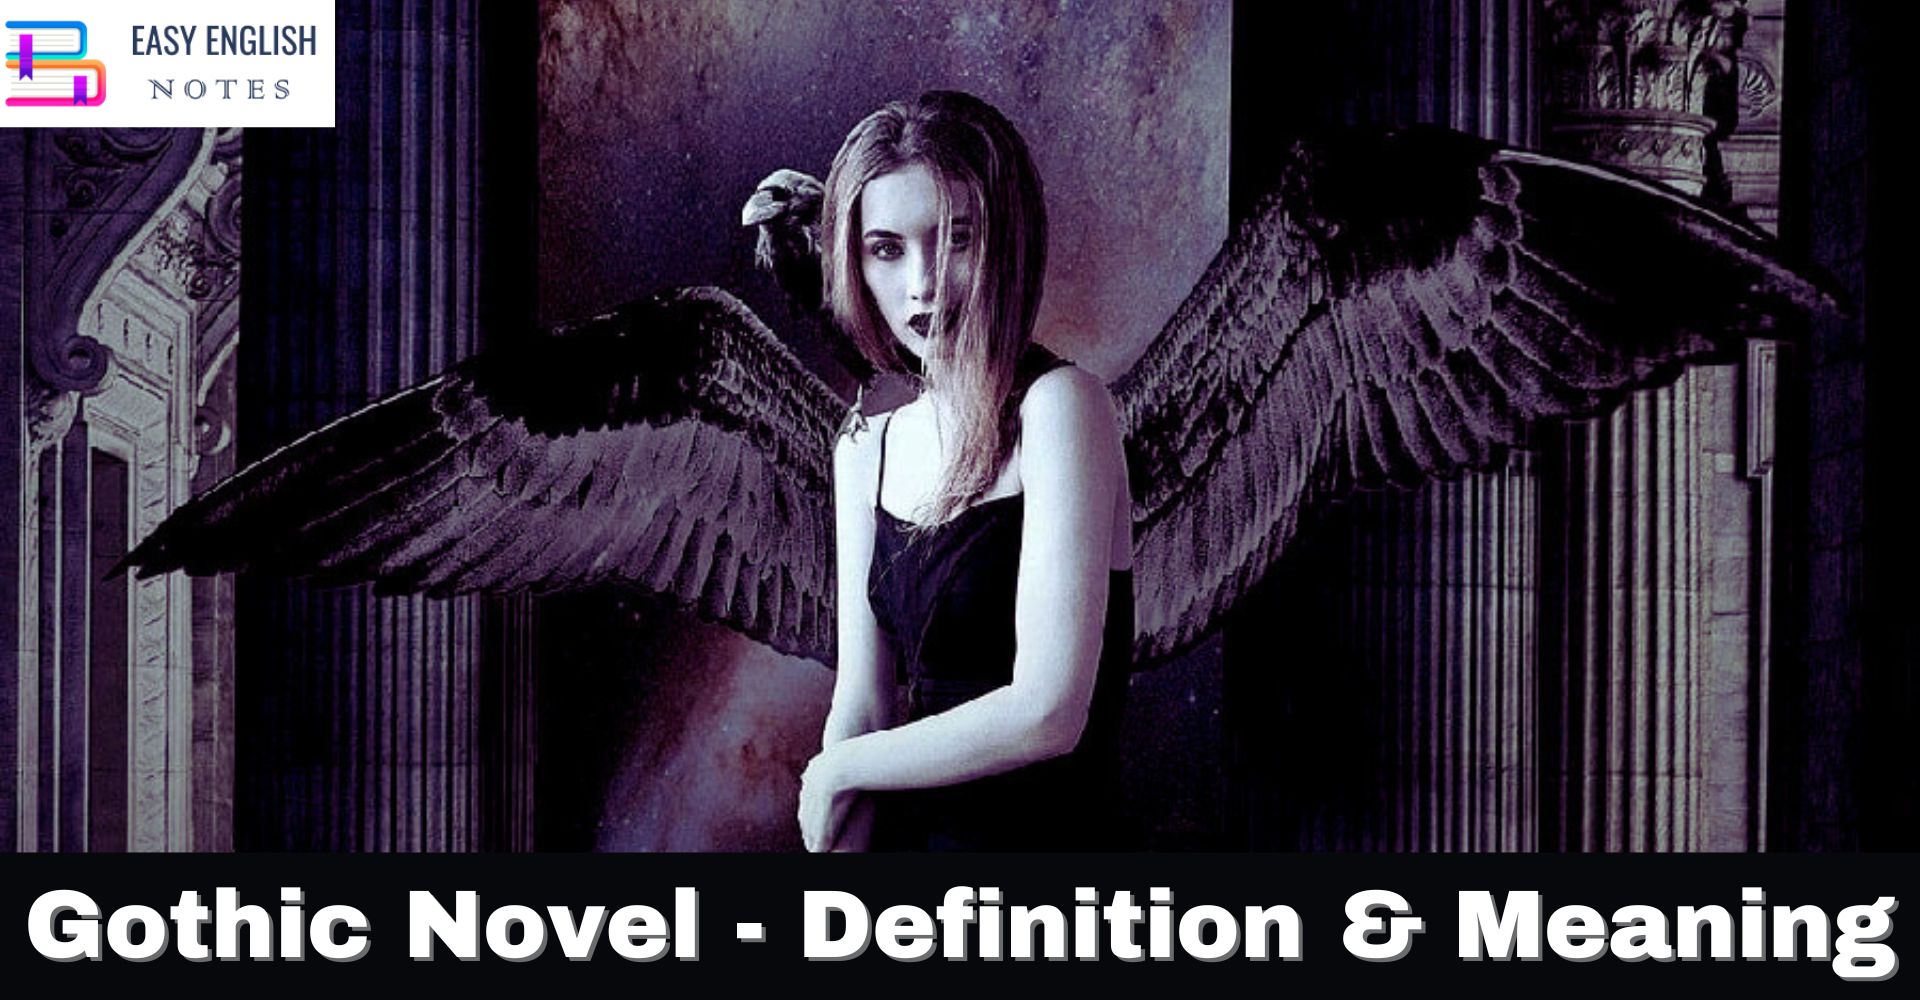 Gothic Novel - Definition & Meaning